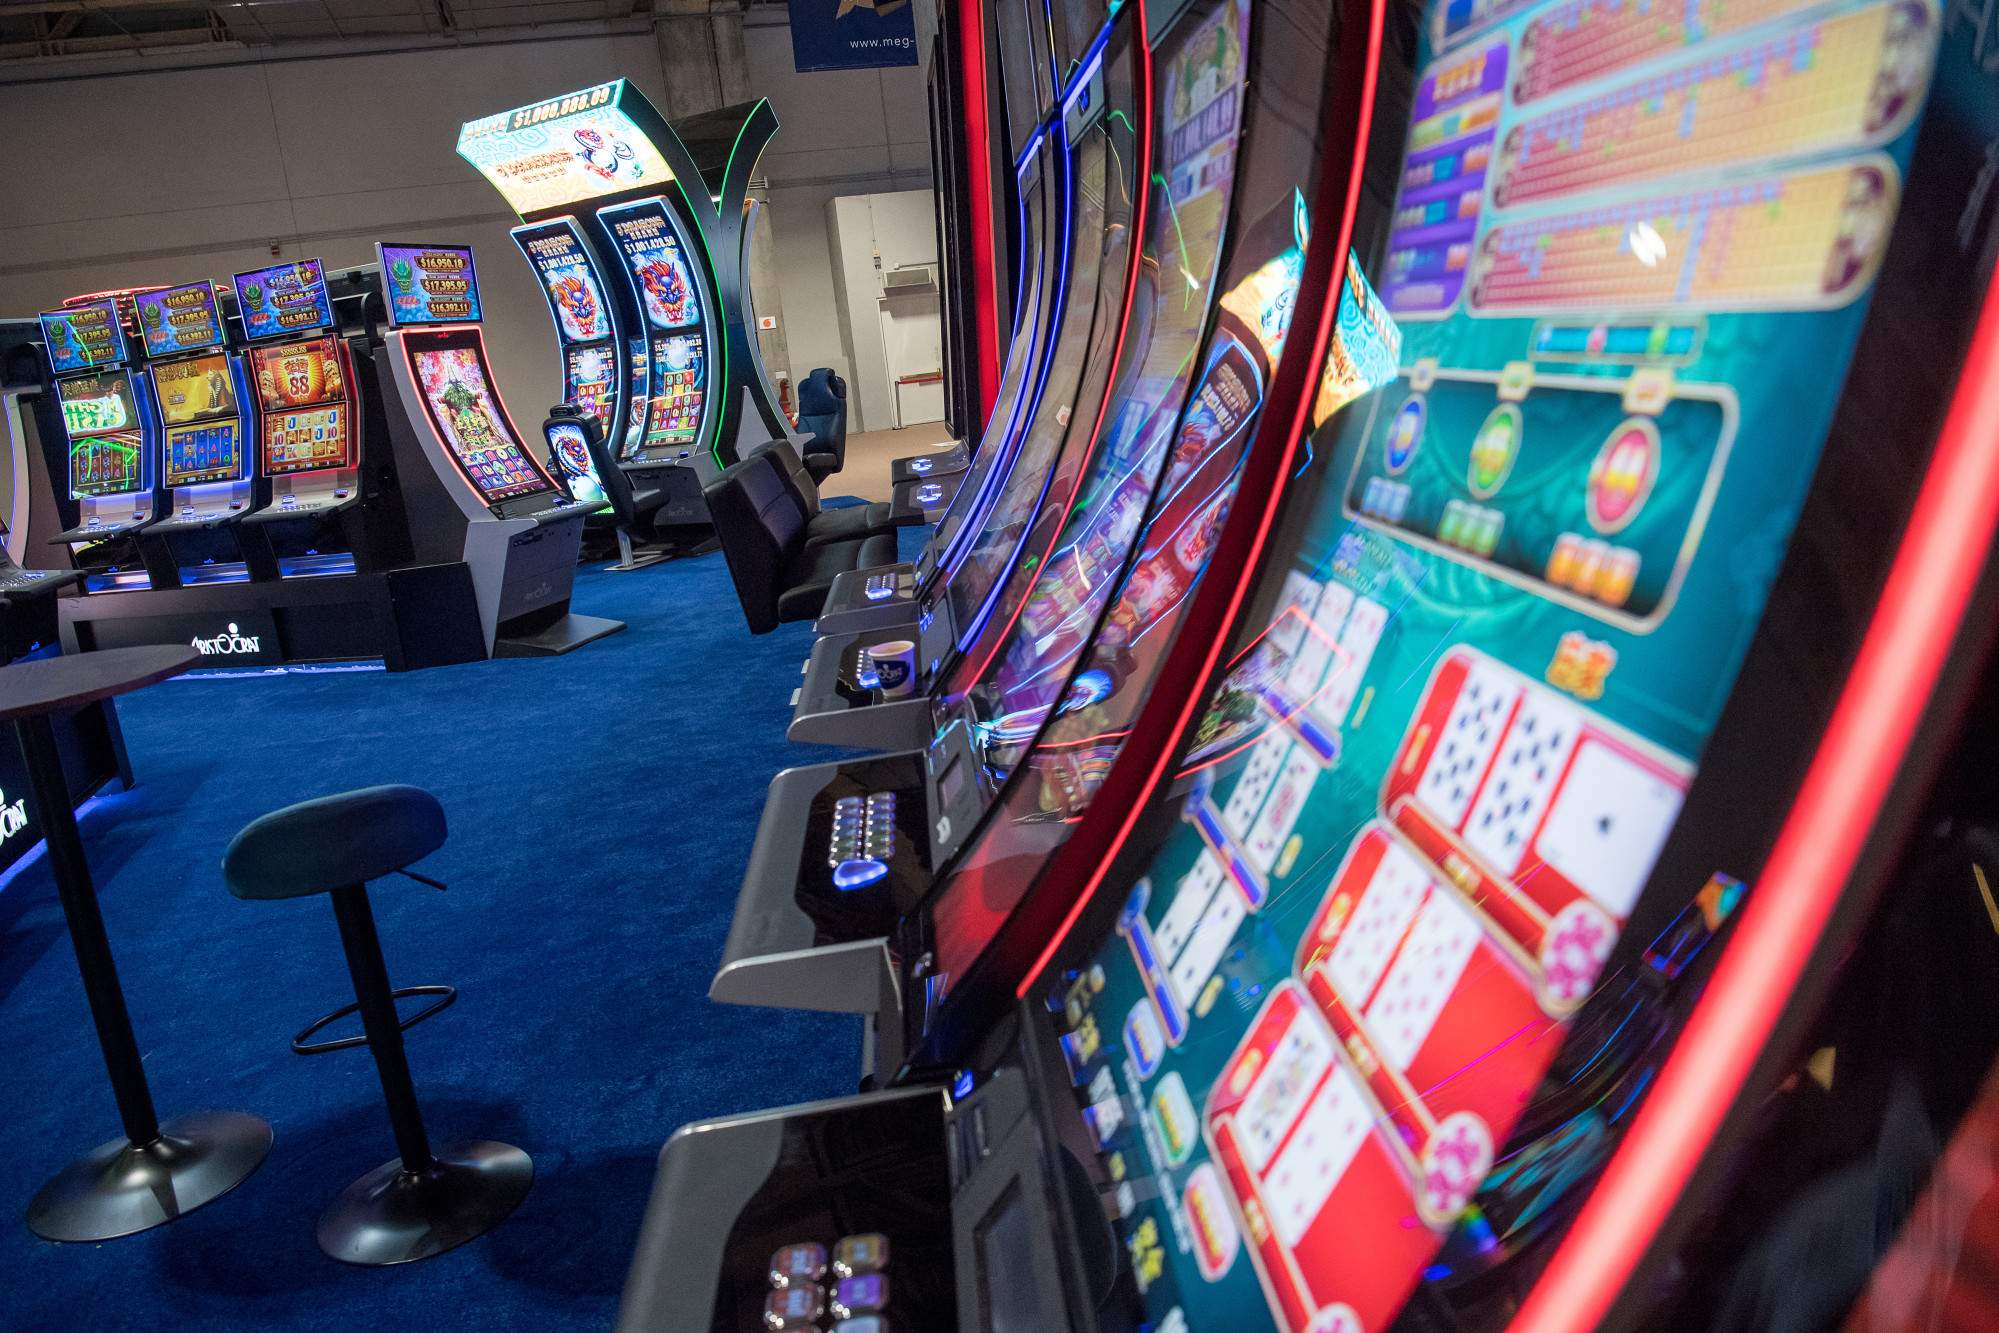 Electronic gaming machines manufactured by Aristocrat Leisure Ltd. stand on display during the Macau Gaming Show (MGS) in Macau, China, on Tuesday, Nov. 14, 2017. Macau regulators are strengthening their oversight of the almost $30 billion casino industry as they plan to release details next year of the renewal process for operators.